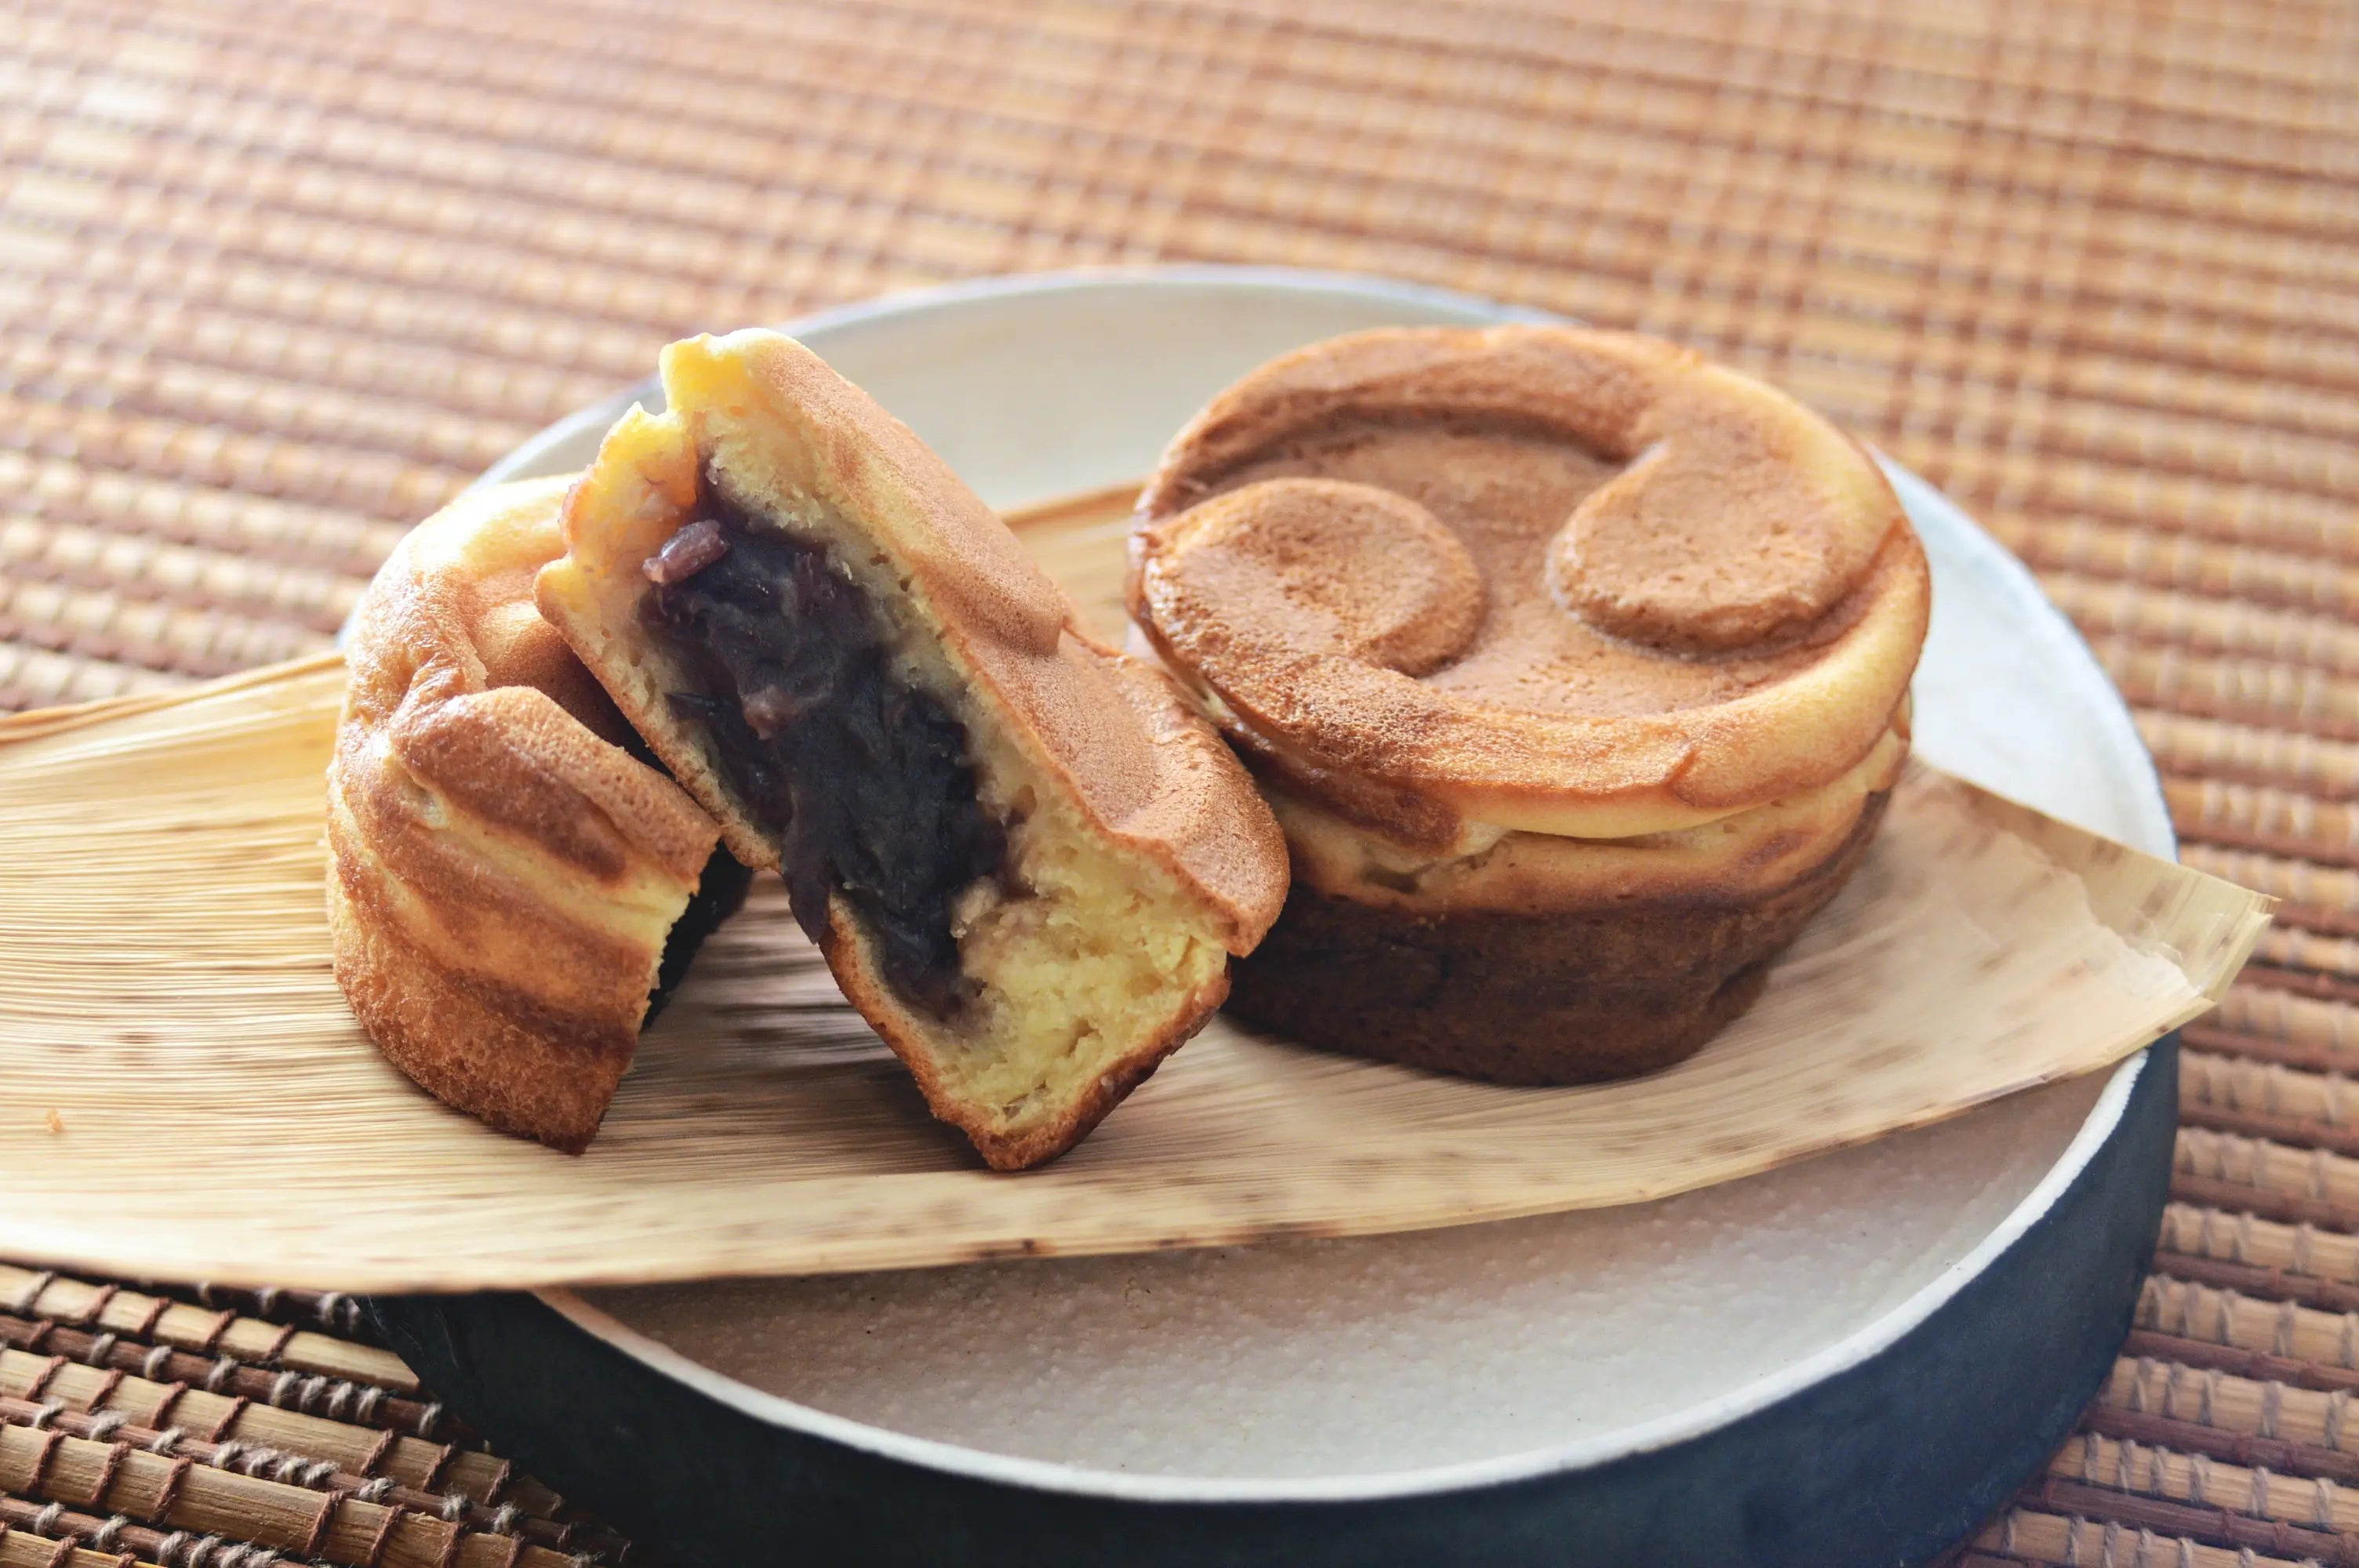 Obanyaki is a round disc-shaped stuffed pancake made of flour, eggs and sugar (or honey) filled with sweet azuki bean paste.